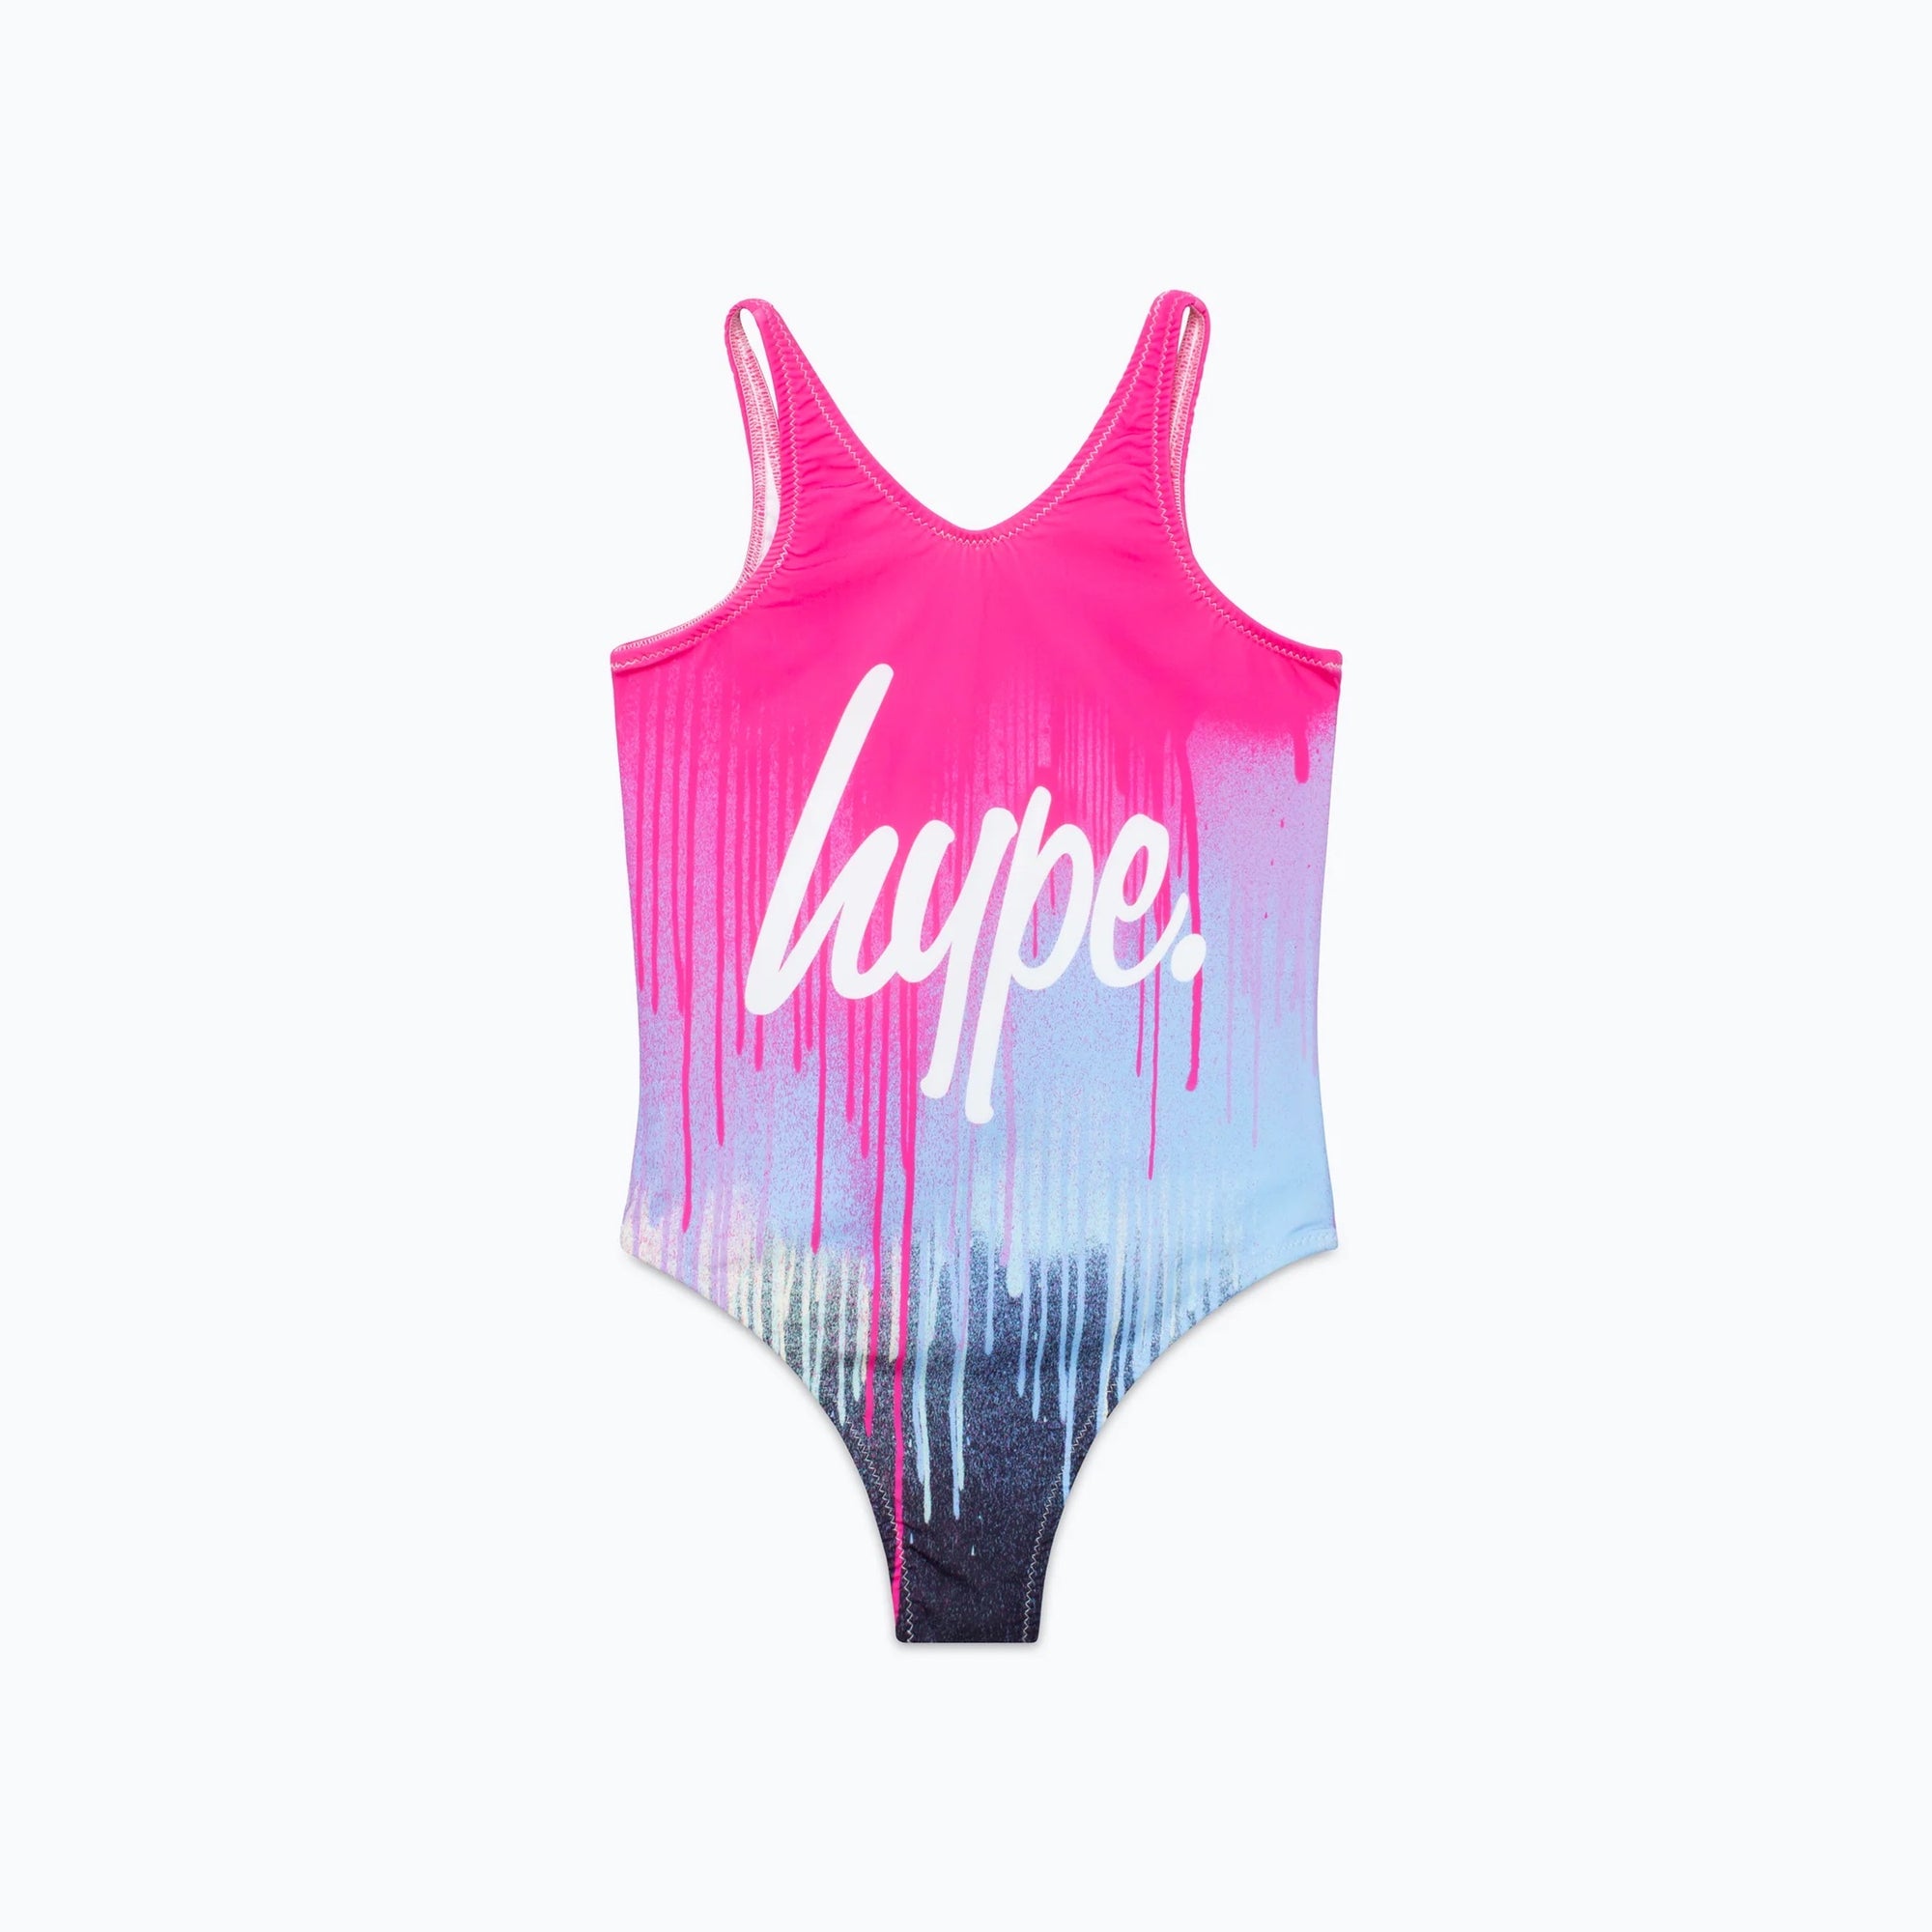 Hype Girls Pink Drip Swimsuit Zumh536 Clothing 9/10YRS / Multi,11/12YRS / Multi,13YRS / Multi,14YRS / Multi